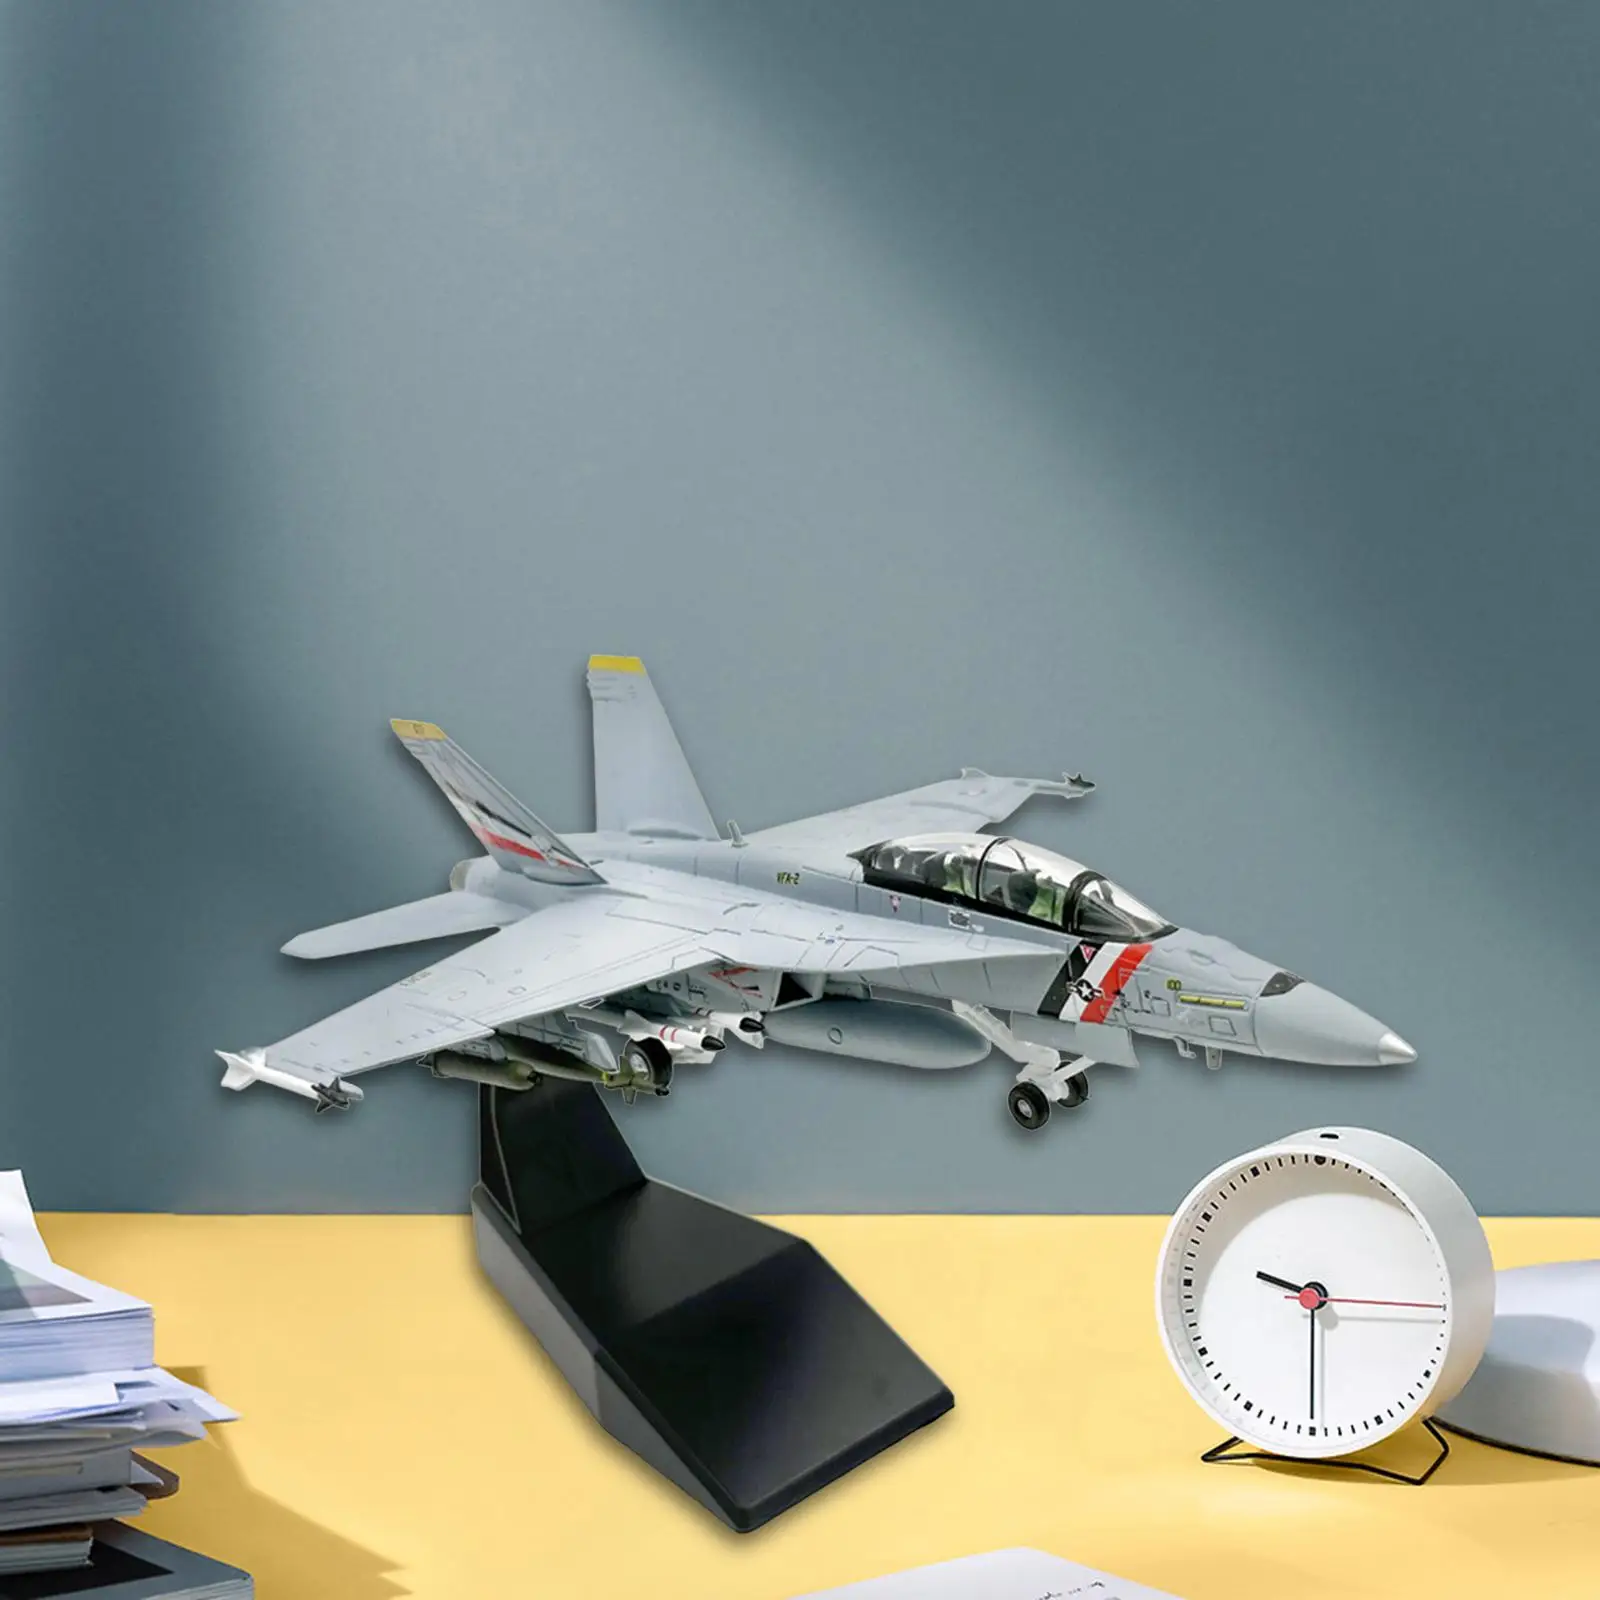 Diecast Alloy Model Simulation 1:100 Jet Aircraft Airplane for Shelf Bedroom TV Cabinet Cafes Aviation Commemorate